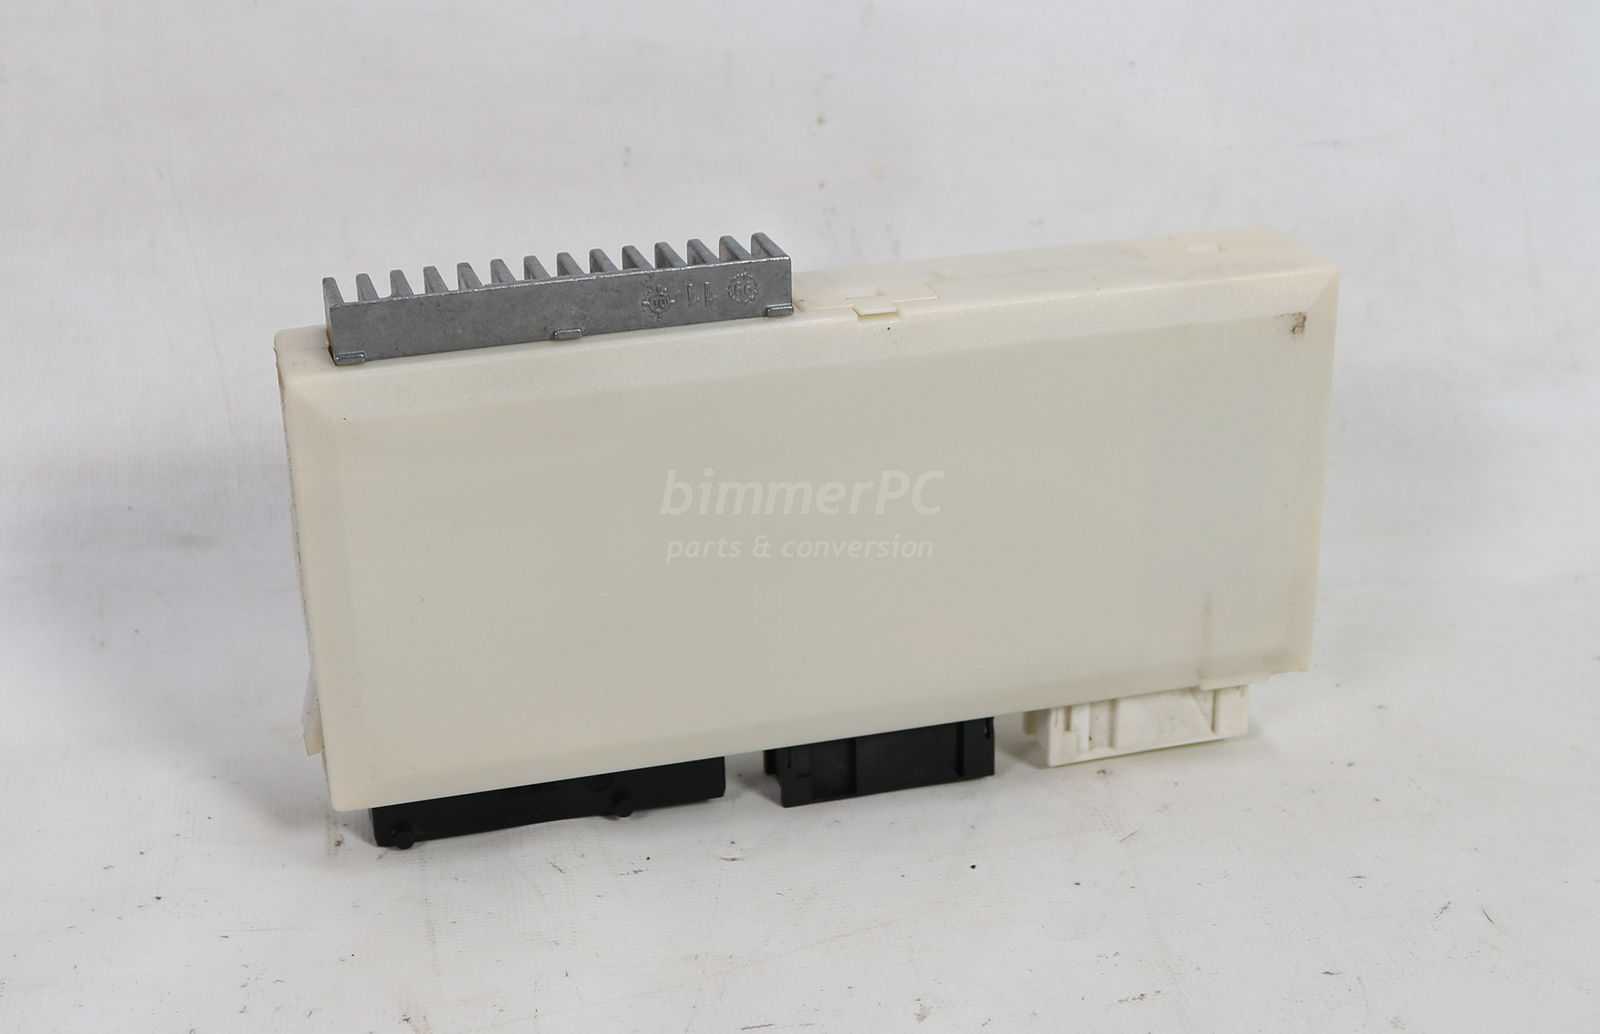 Picture of BMW 61356905842 General Module GMIII Body Control Computer Unit E53 Early for sale